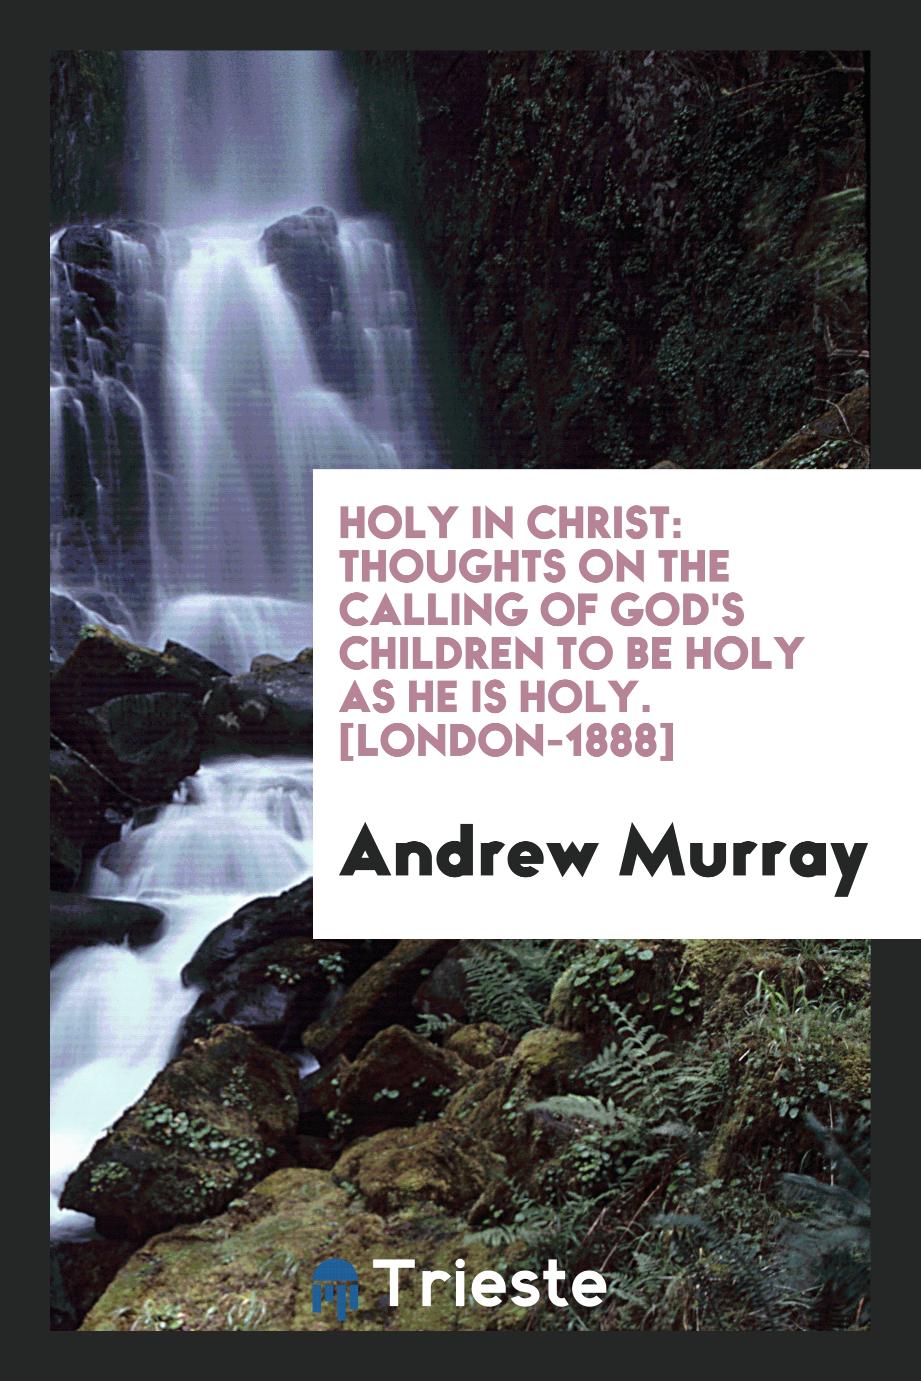 Holy in Christ: Thoughts on the Calling of God's Children to Be Holy as He Is Holy. [London-1888]